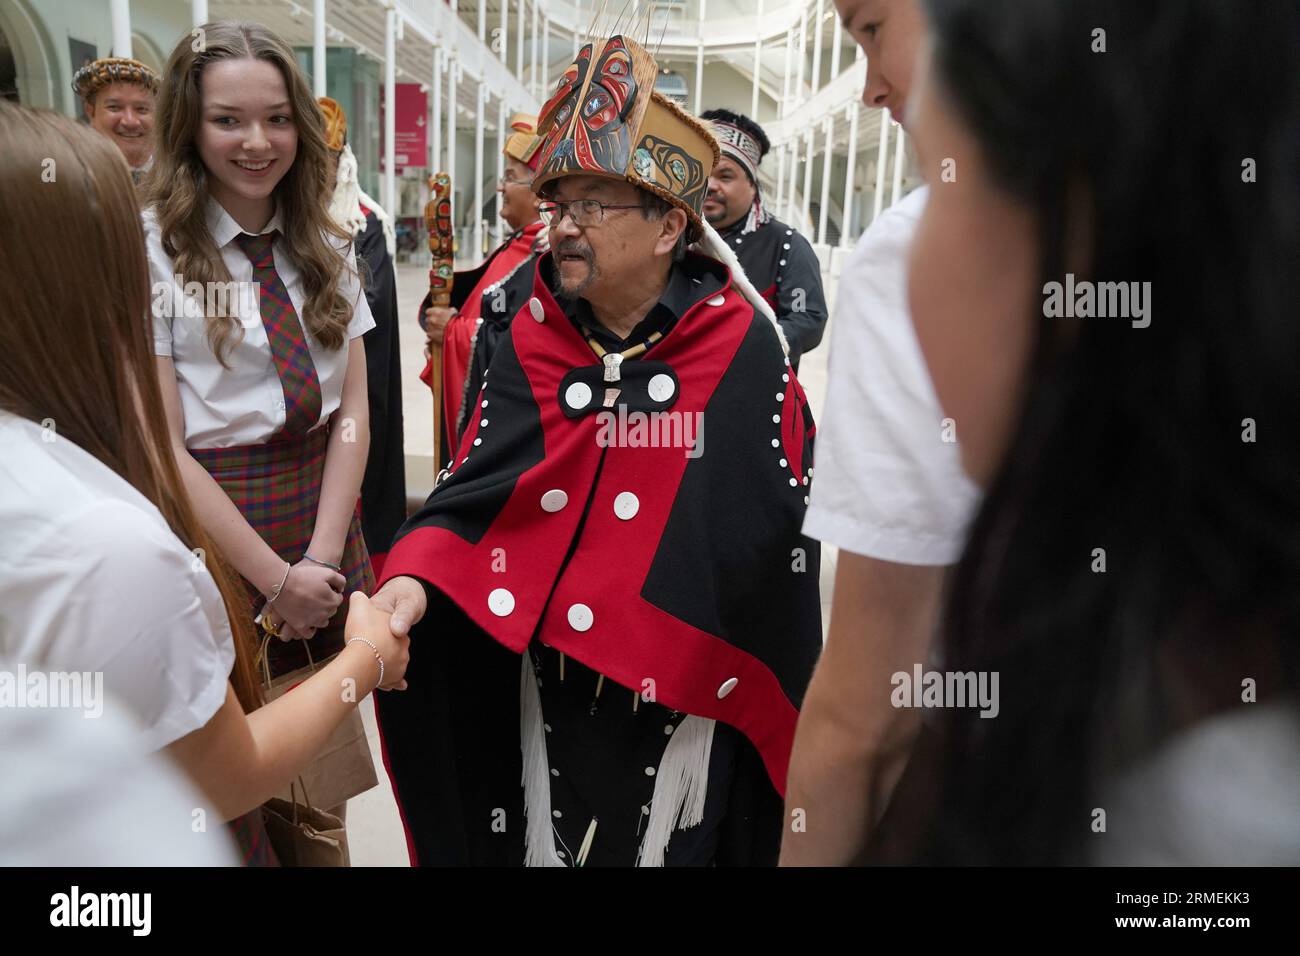 Earl Stephen's(who has the Nisga'a cultural name Chief Ni'is Joohl) part of the delegation from the Nisga'a nation thanks children from the Glasgow Gaelic School who performed during a visit to the National Museum of Scotland in Edinburgh, ahead of the return of 11-metre tall memorial pole to what is now British Columbia. The Nisga'a Lisims Government (NLG) and National Museums Scotland (NMS) announced last month that the House of Ni'isjoohl memorial pole will return home to the Nass Valley this September. Picture date: Monday August 28, 2023. Stock Photo